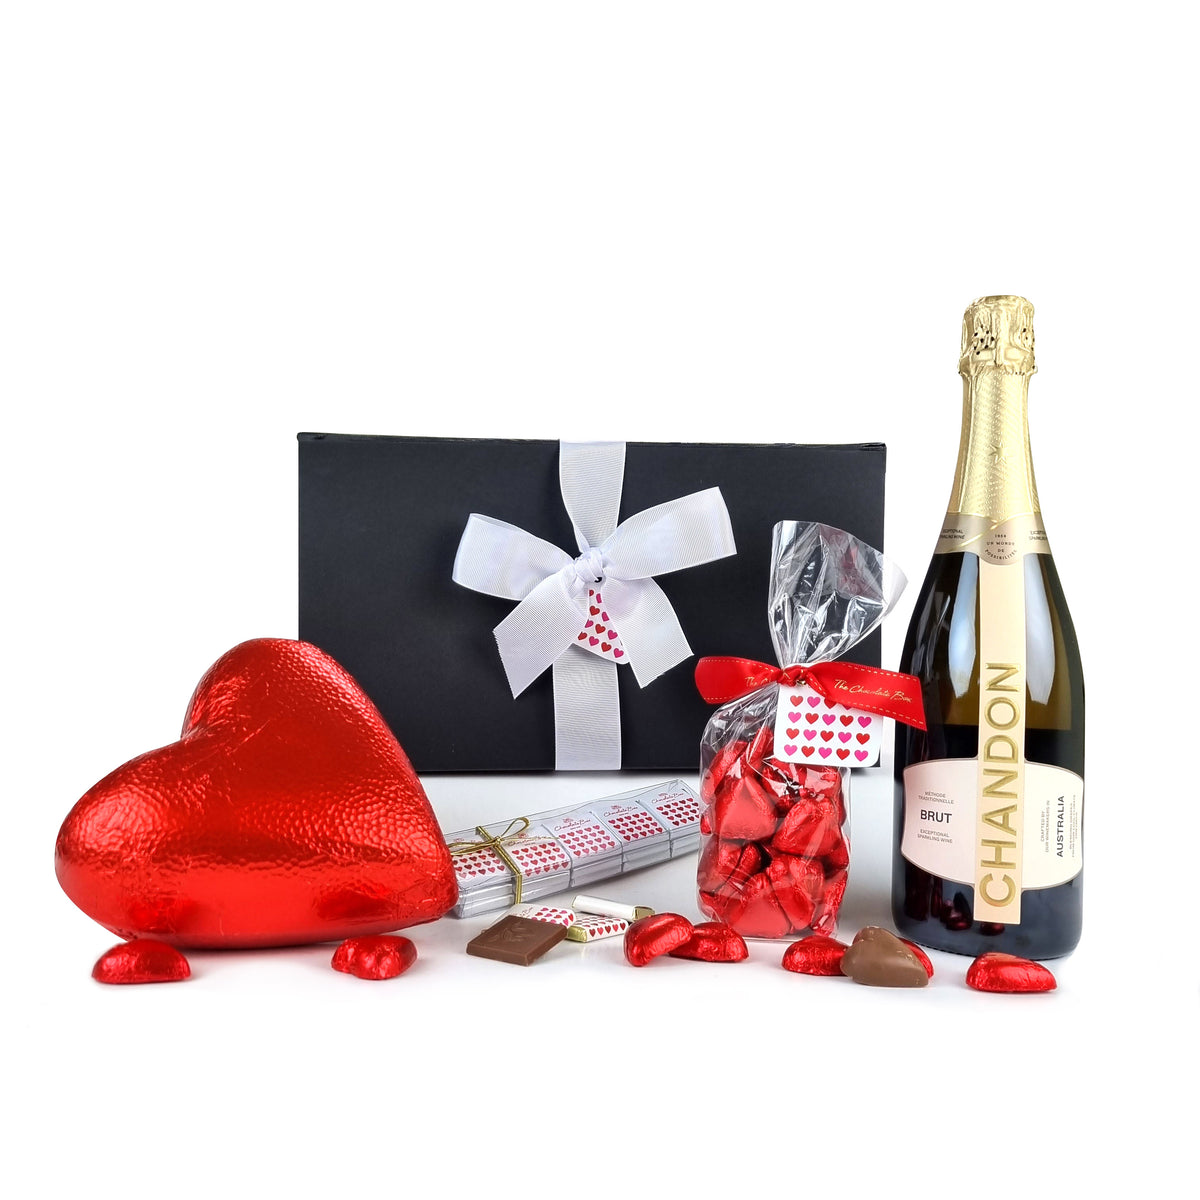 Valentines Day Hampers & Gifts - Same Day Delivery